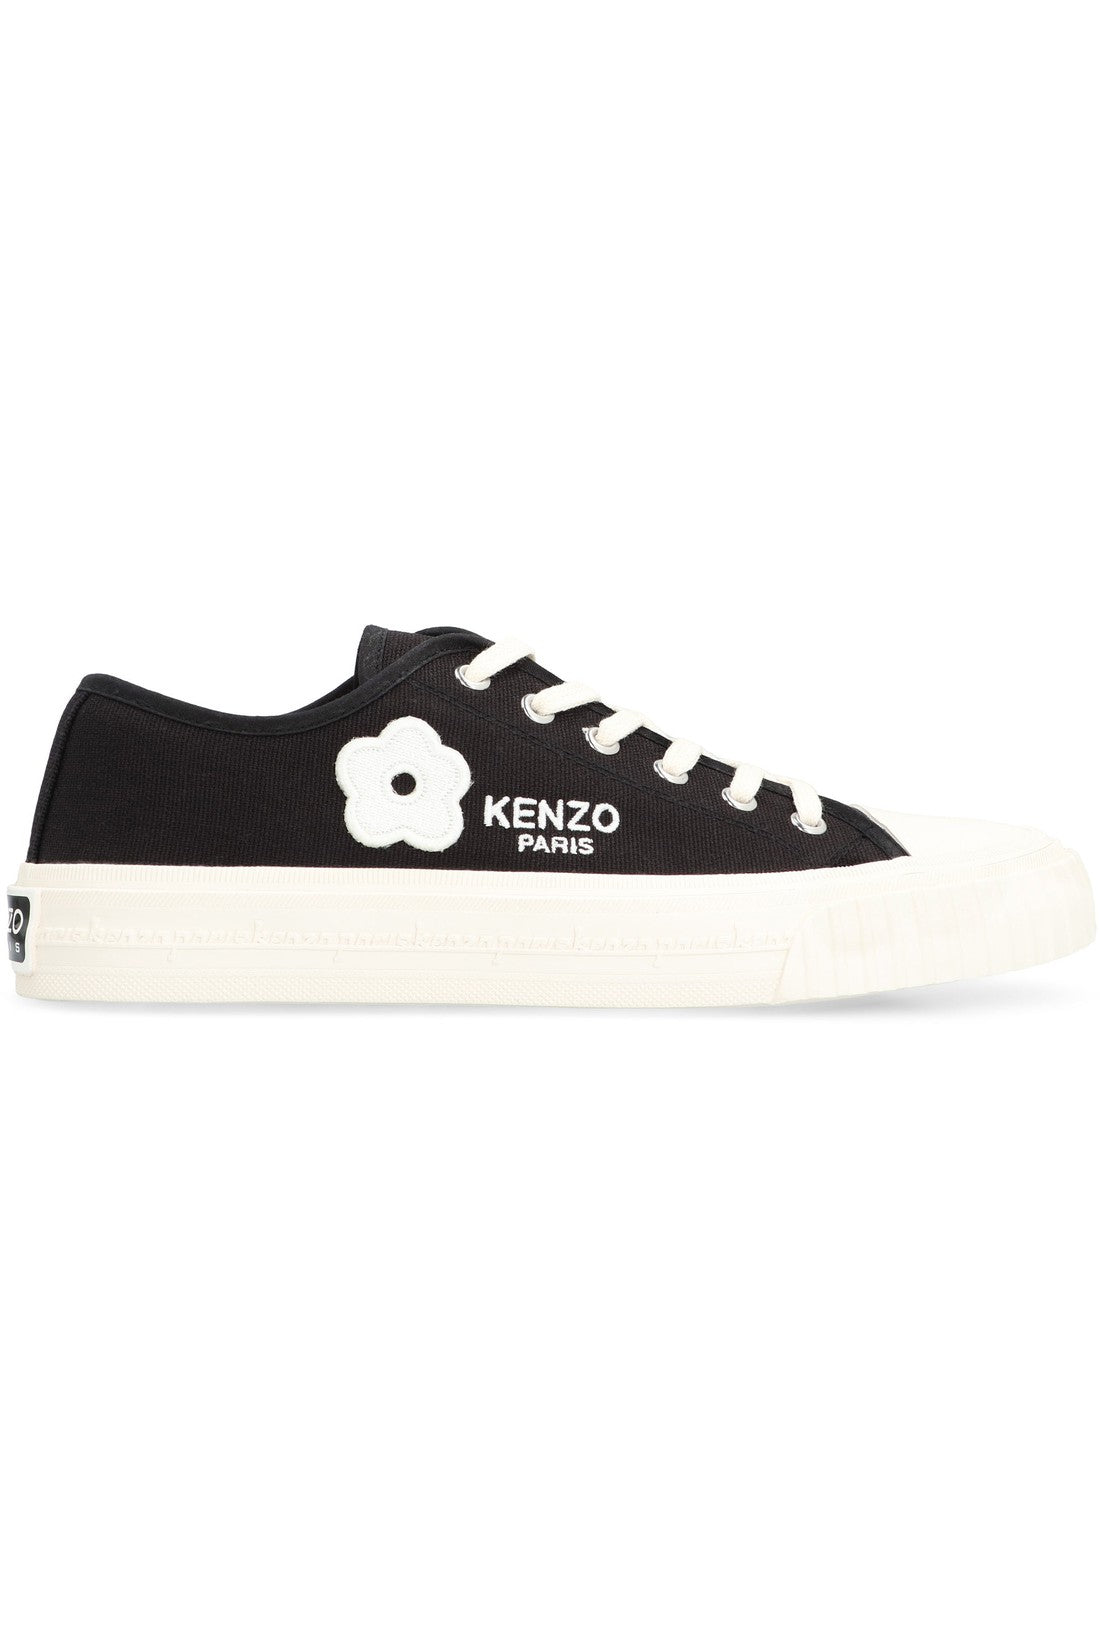 Kenzo-OUTLET-SALE-Kenzo Foxy canvas sneakers-ARCHIVIST